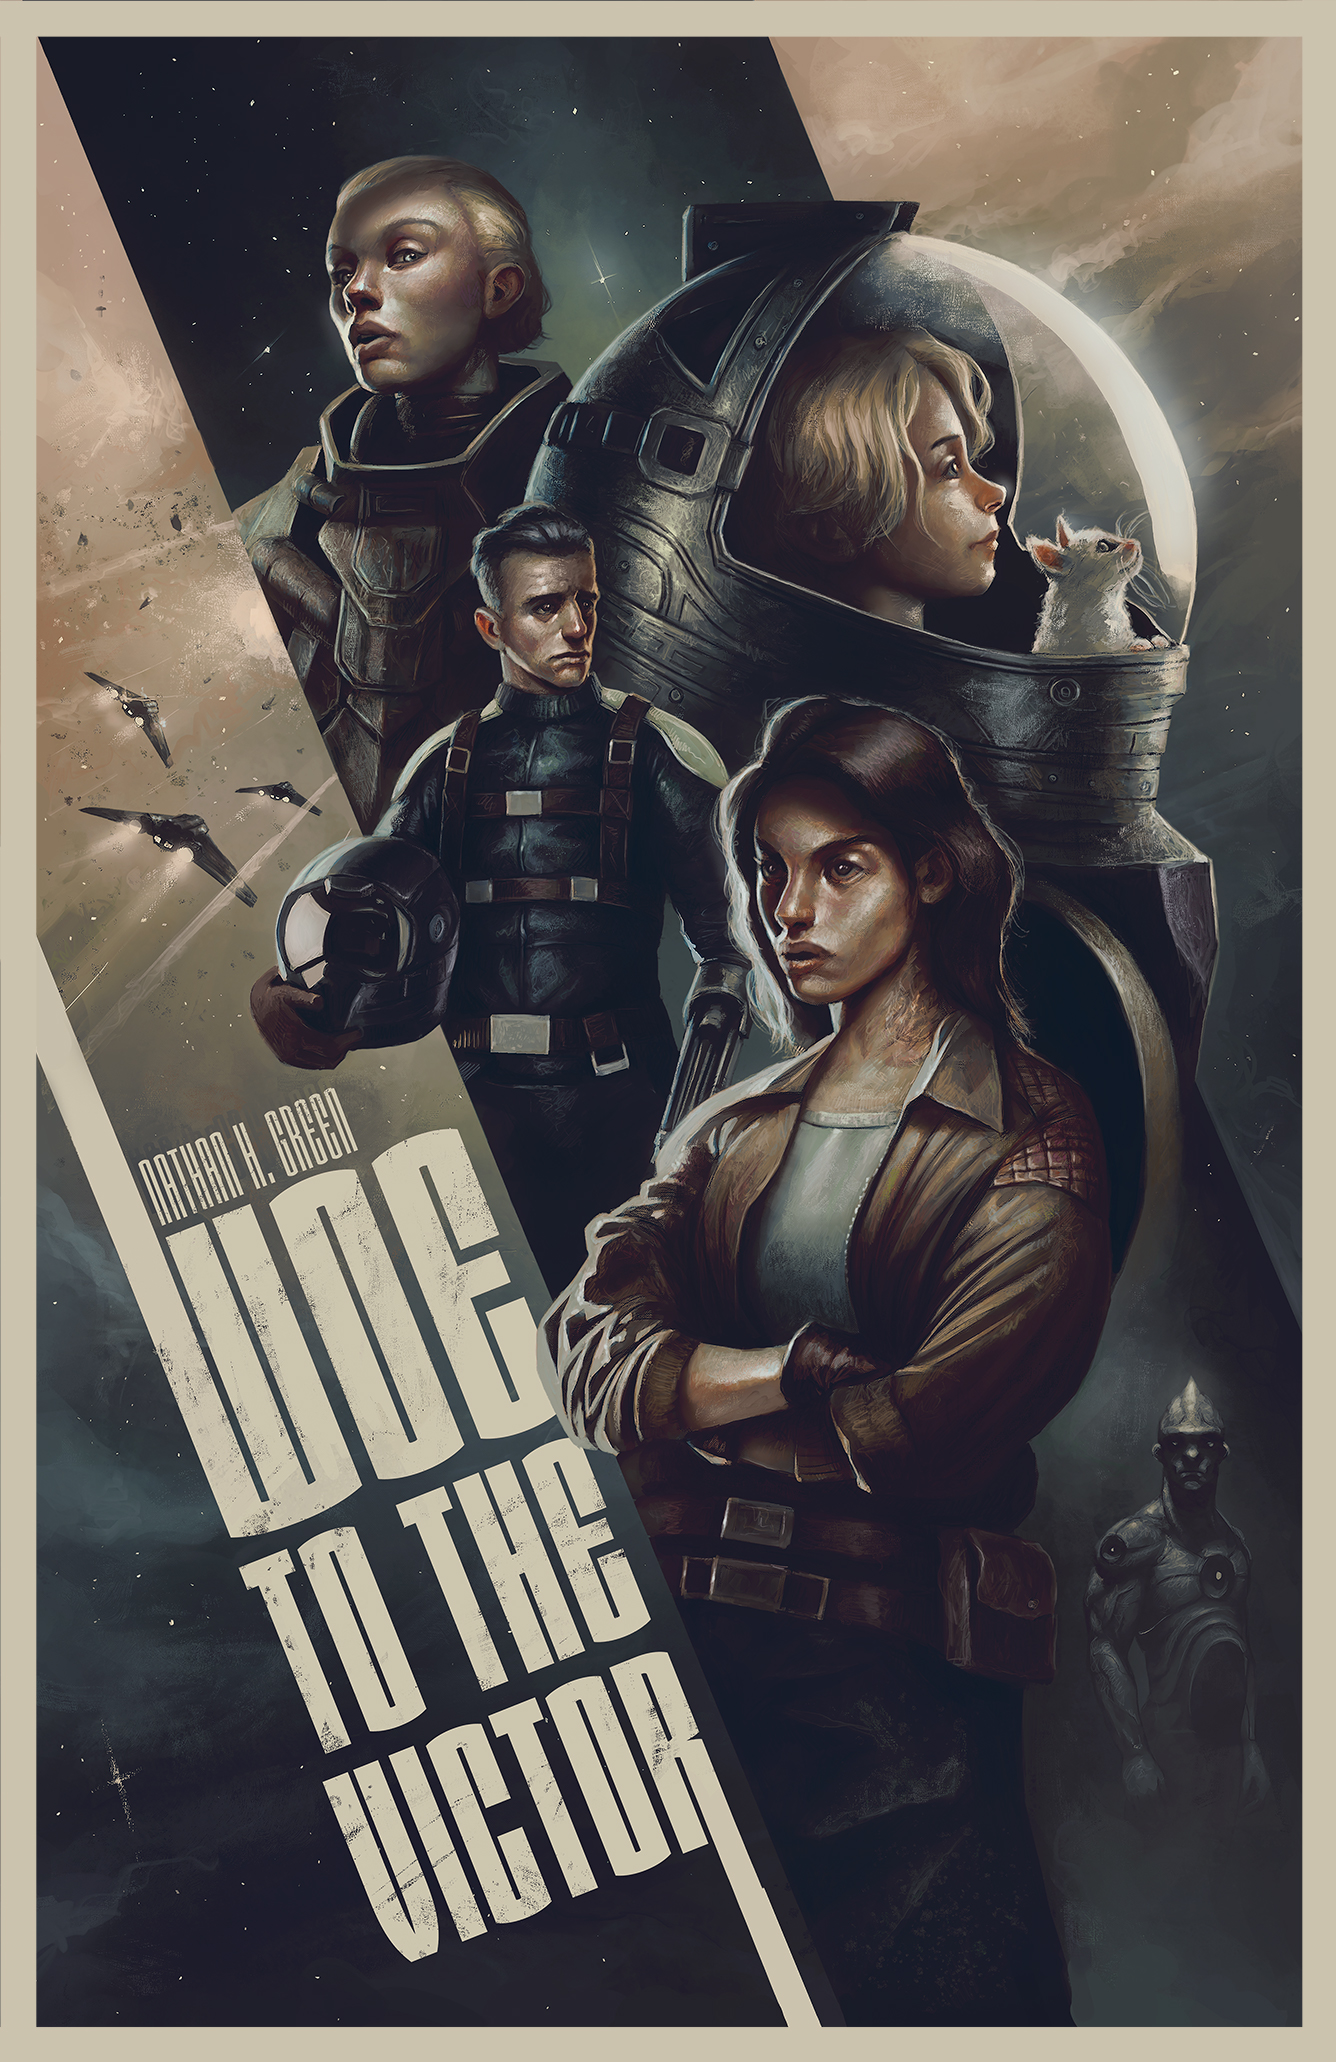 Cover of Nathan H. Green's science fiction novel Woe to the Victor